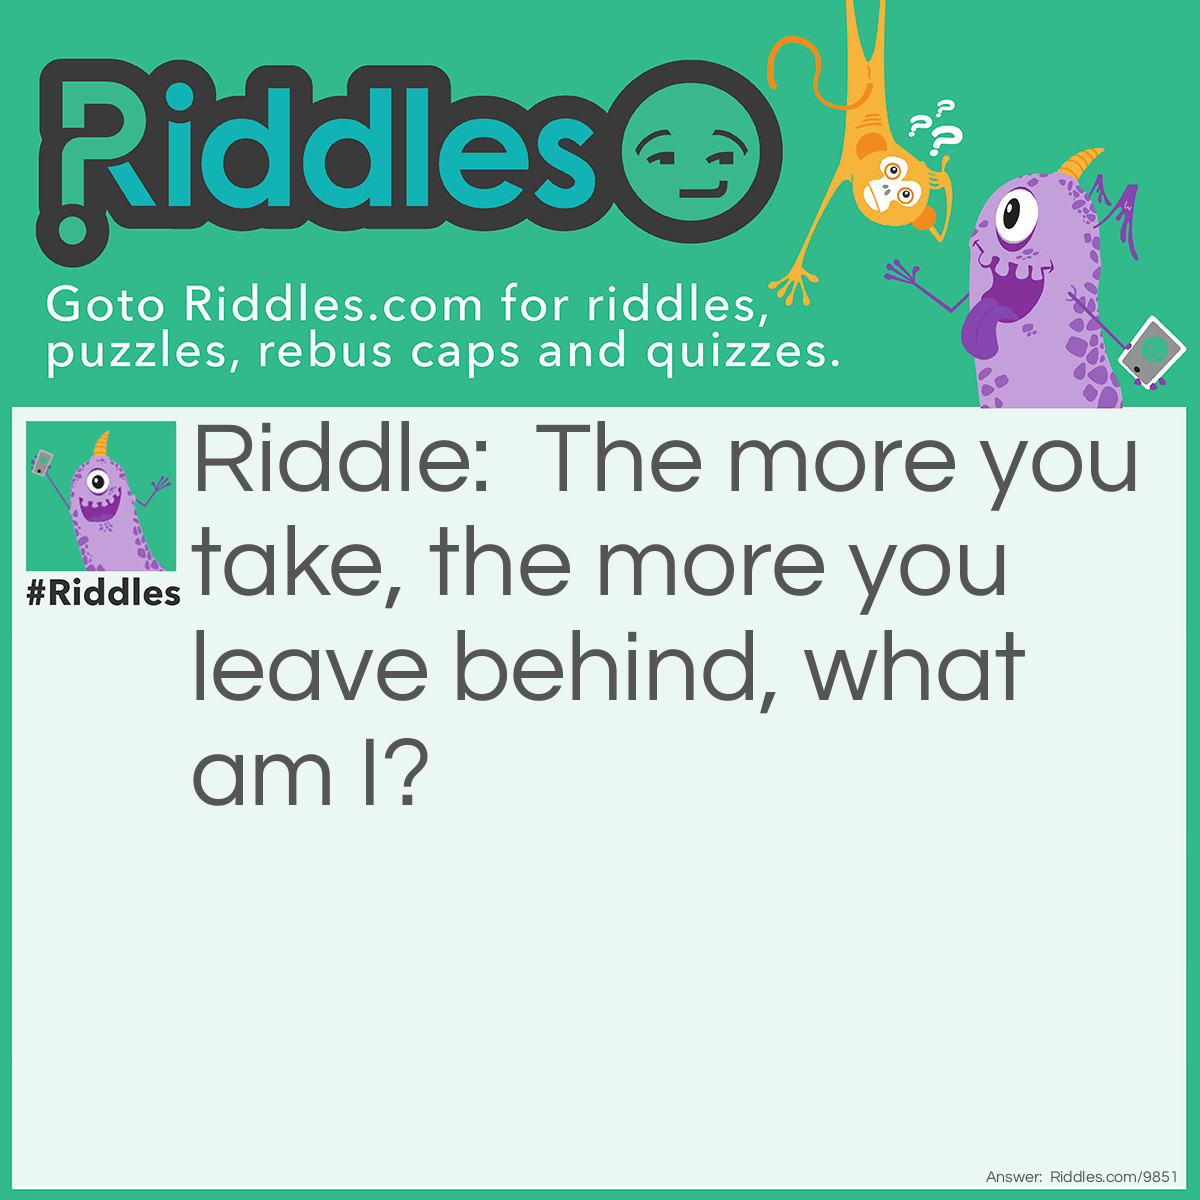 Riddle: The more you take, the more you leave behind, what am I? Answer: Footprints!